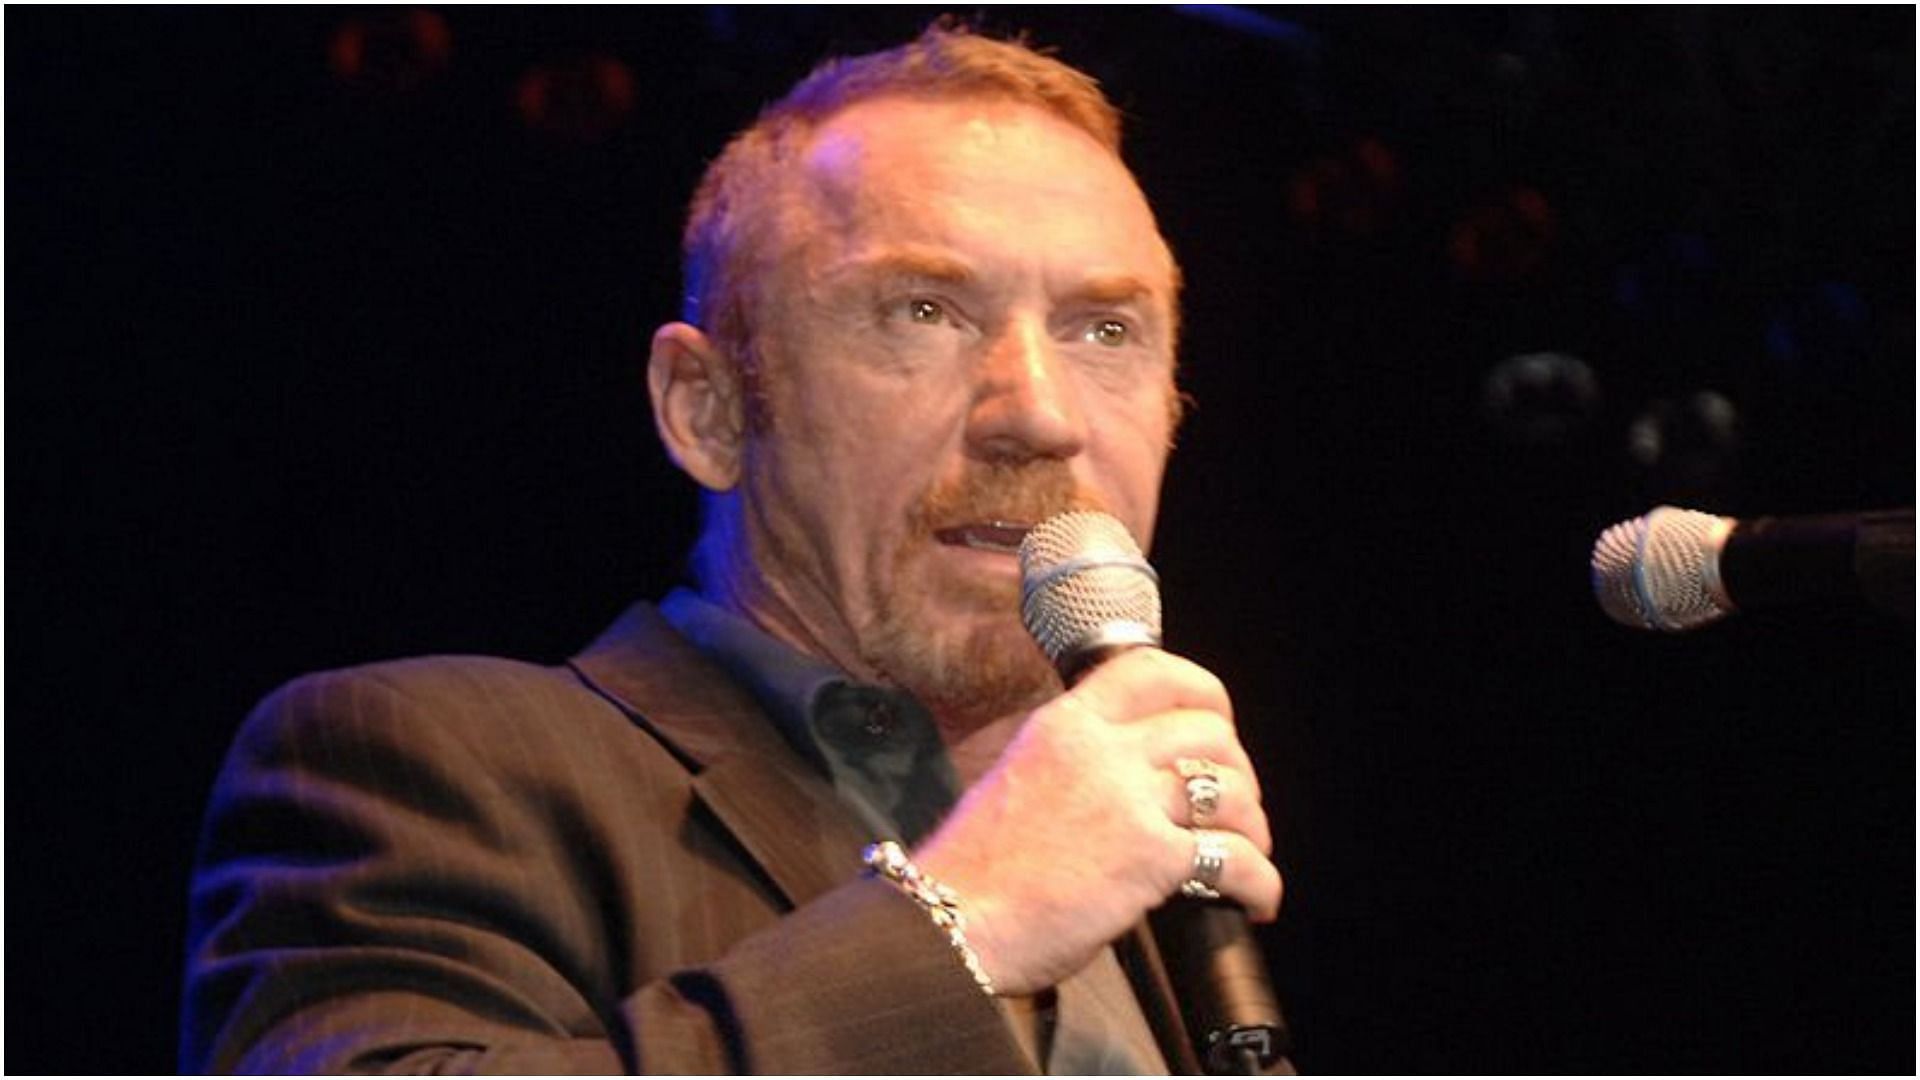 Danny Bonaduce has been diagnosed with a mysterious illness (Image via Denise Truscello/Getty Images)